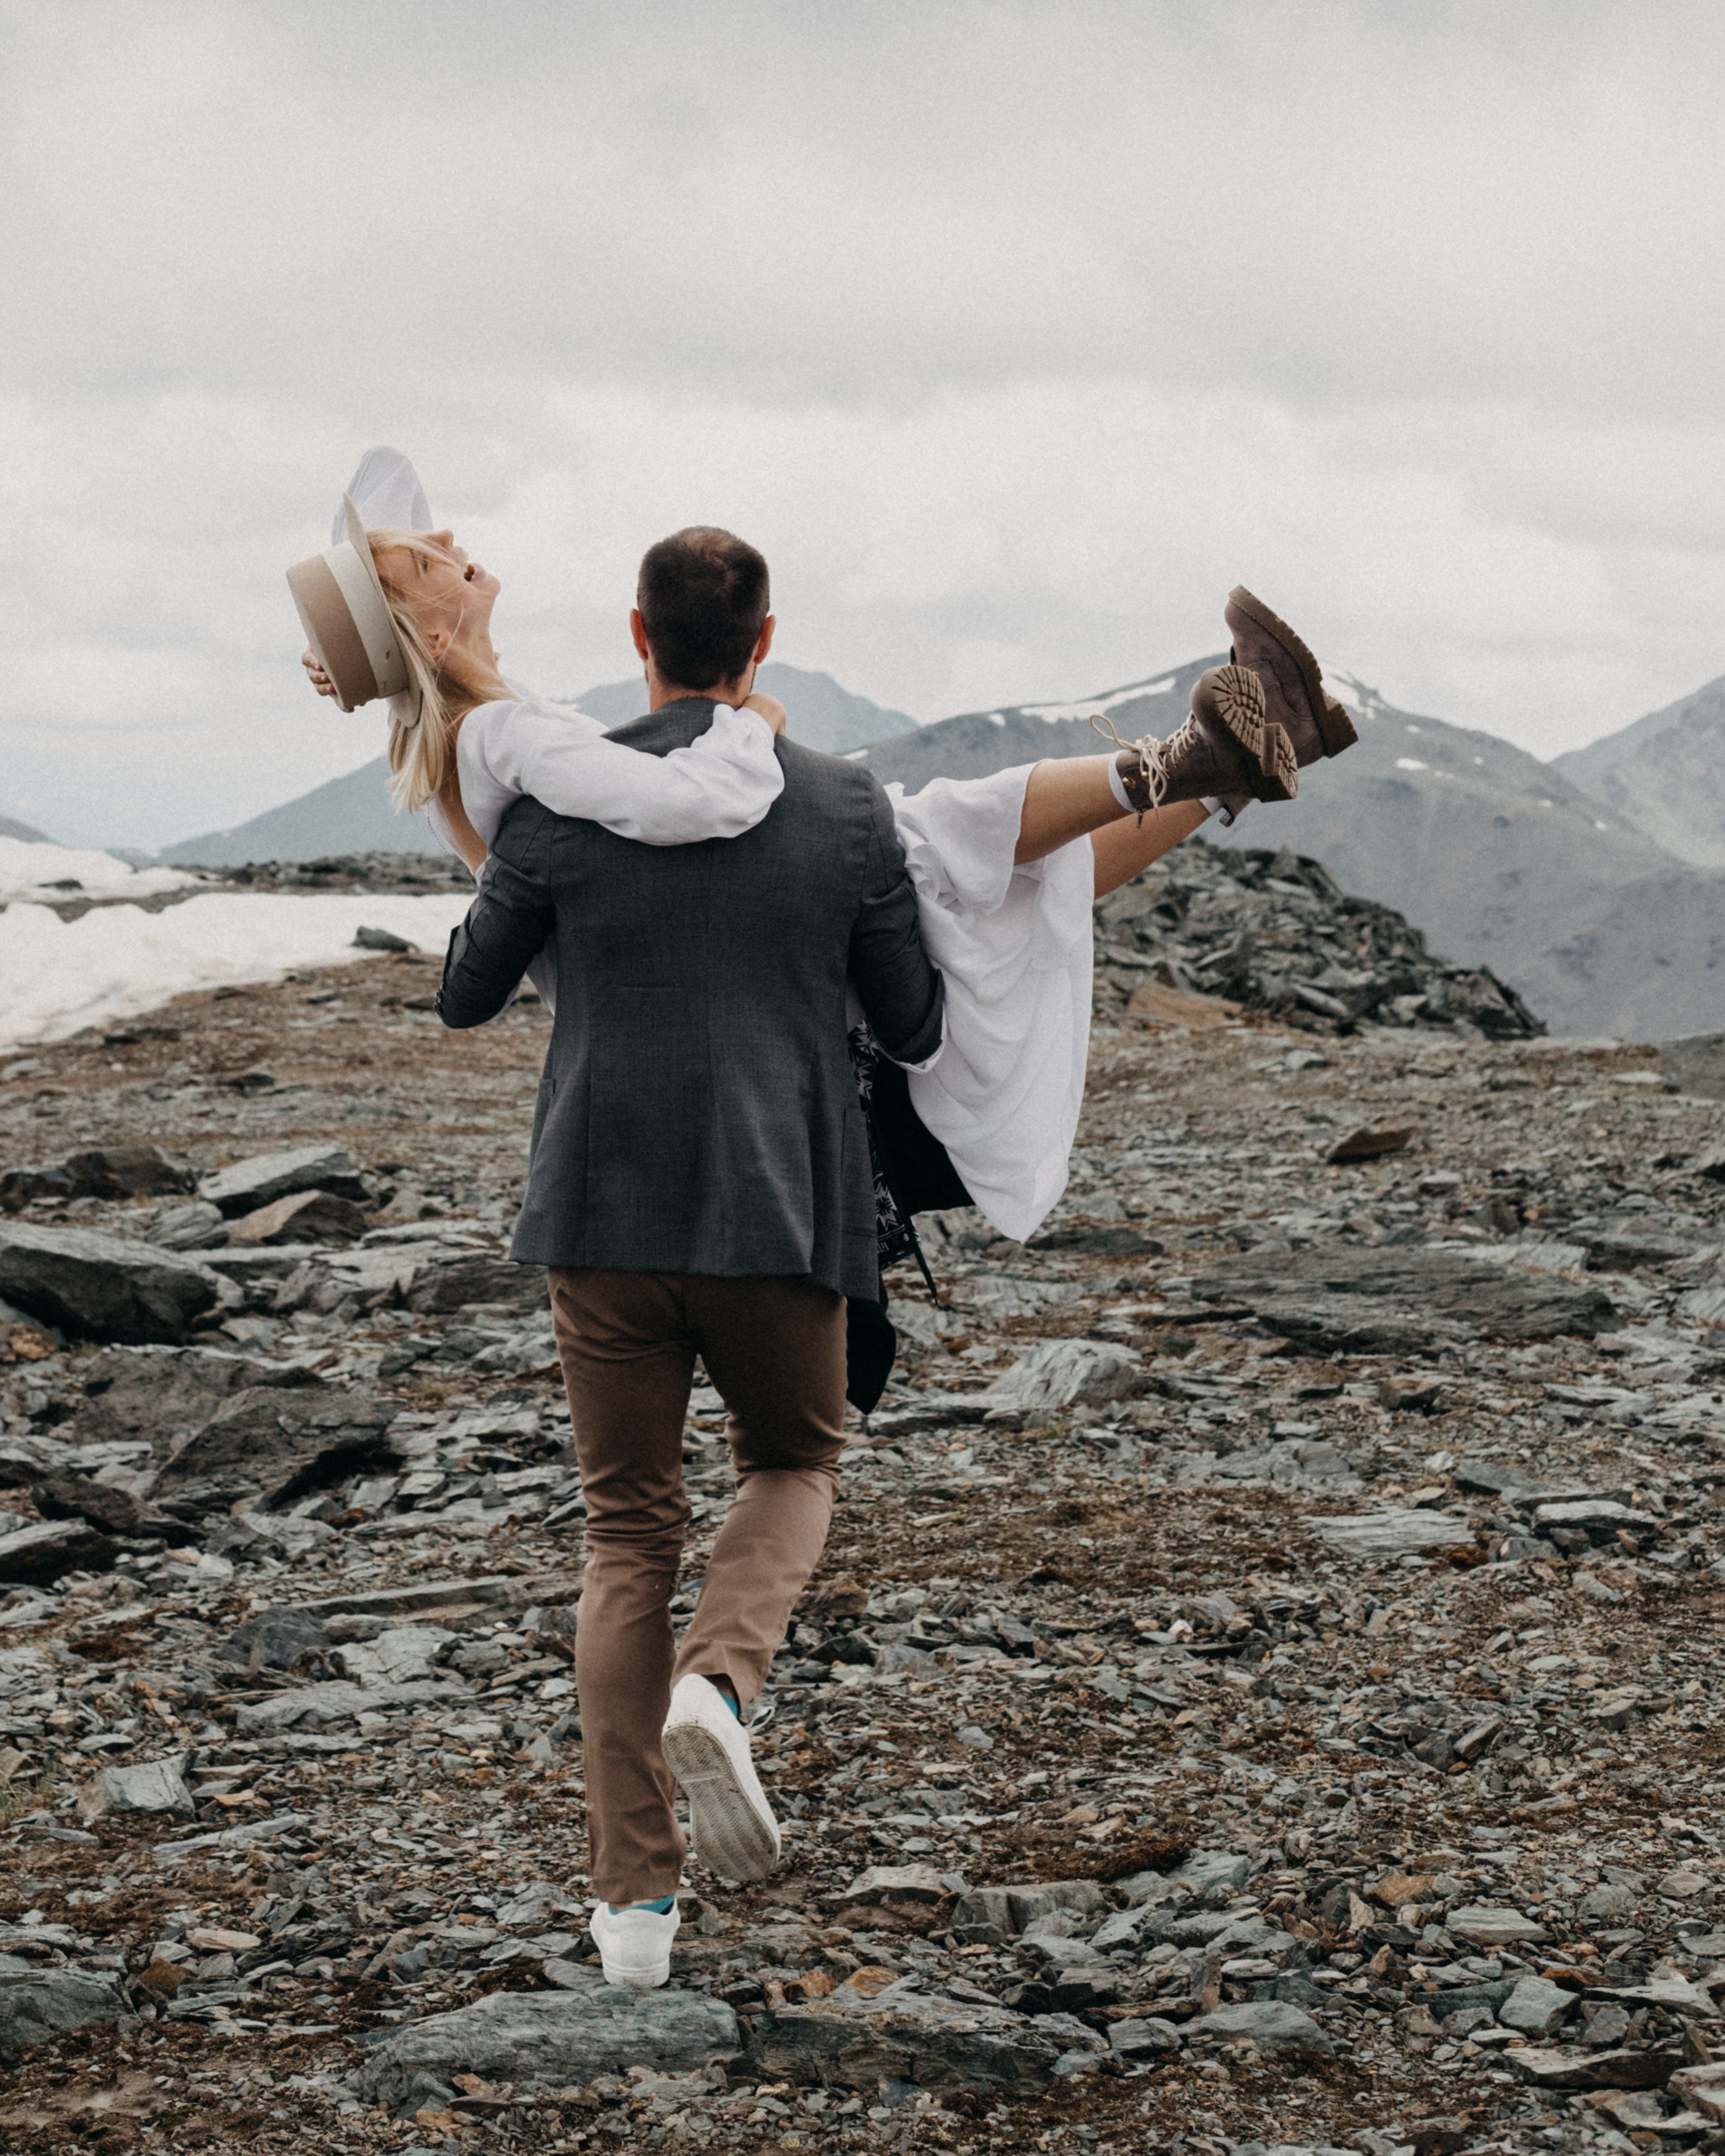 A couple having fun together. | Source: Pexels